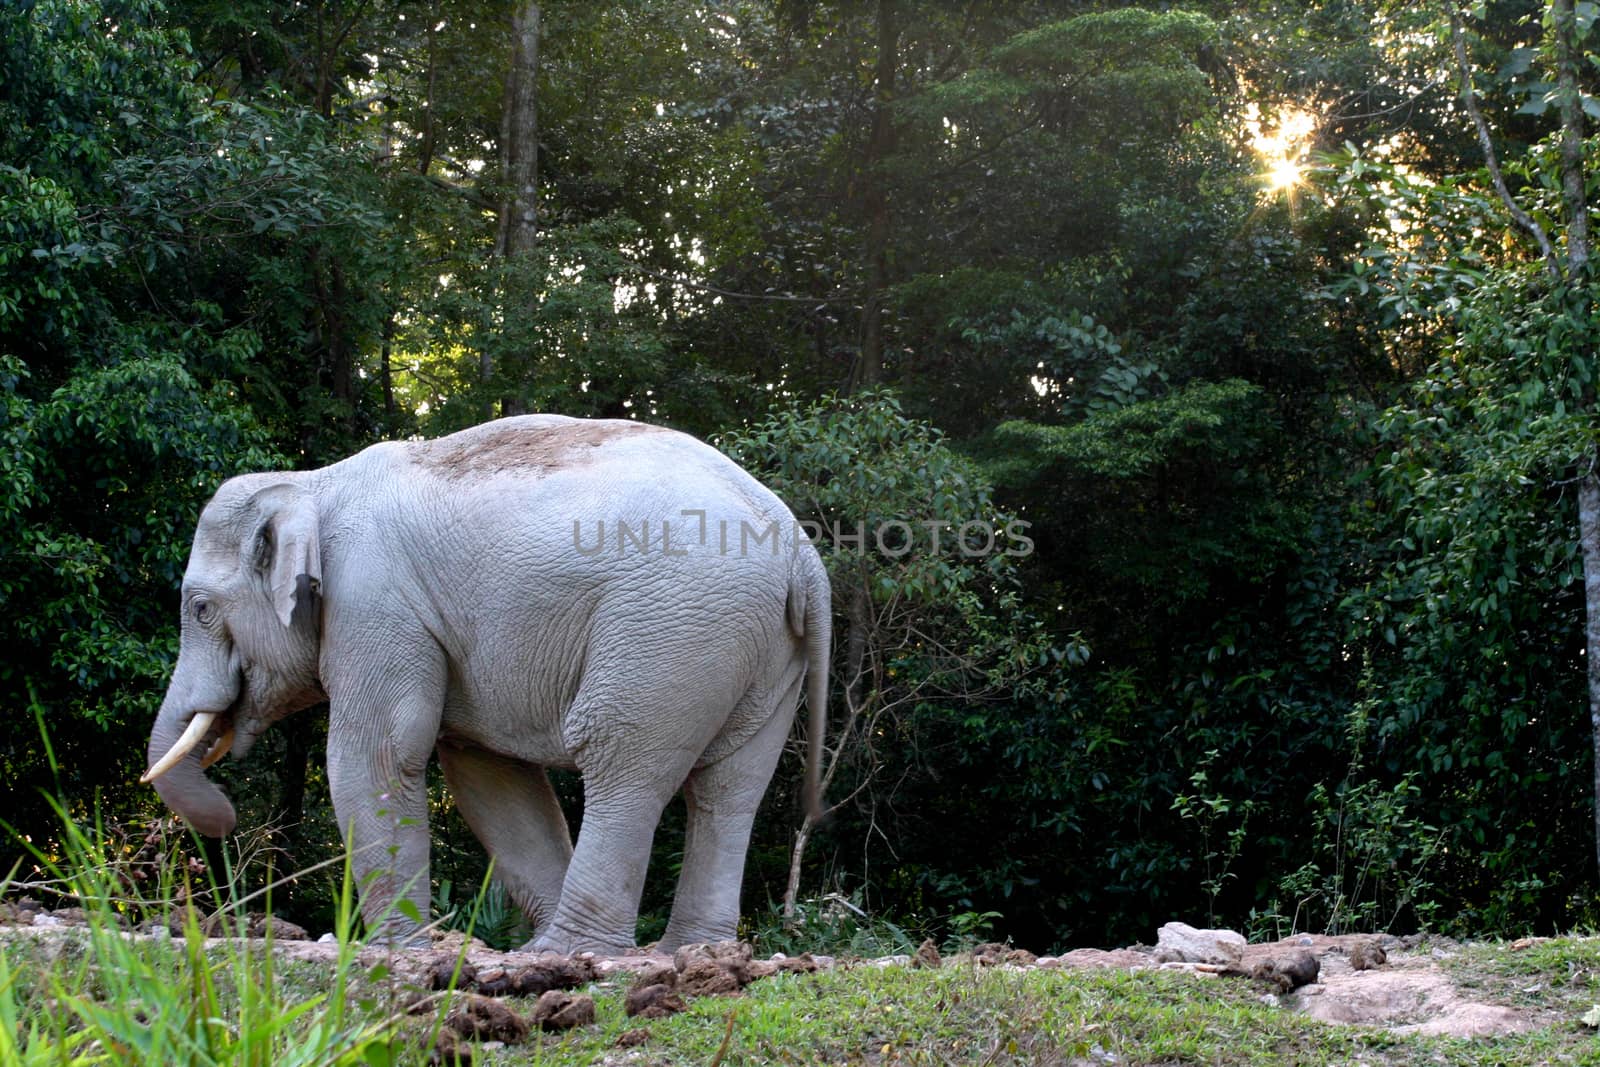 asia elephant in tropical forest, thailand by think4photop